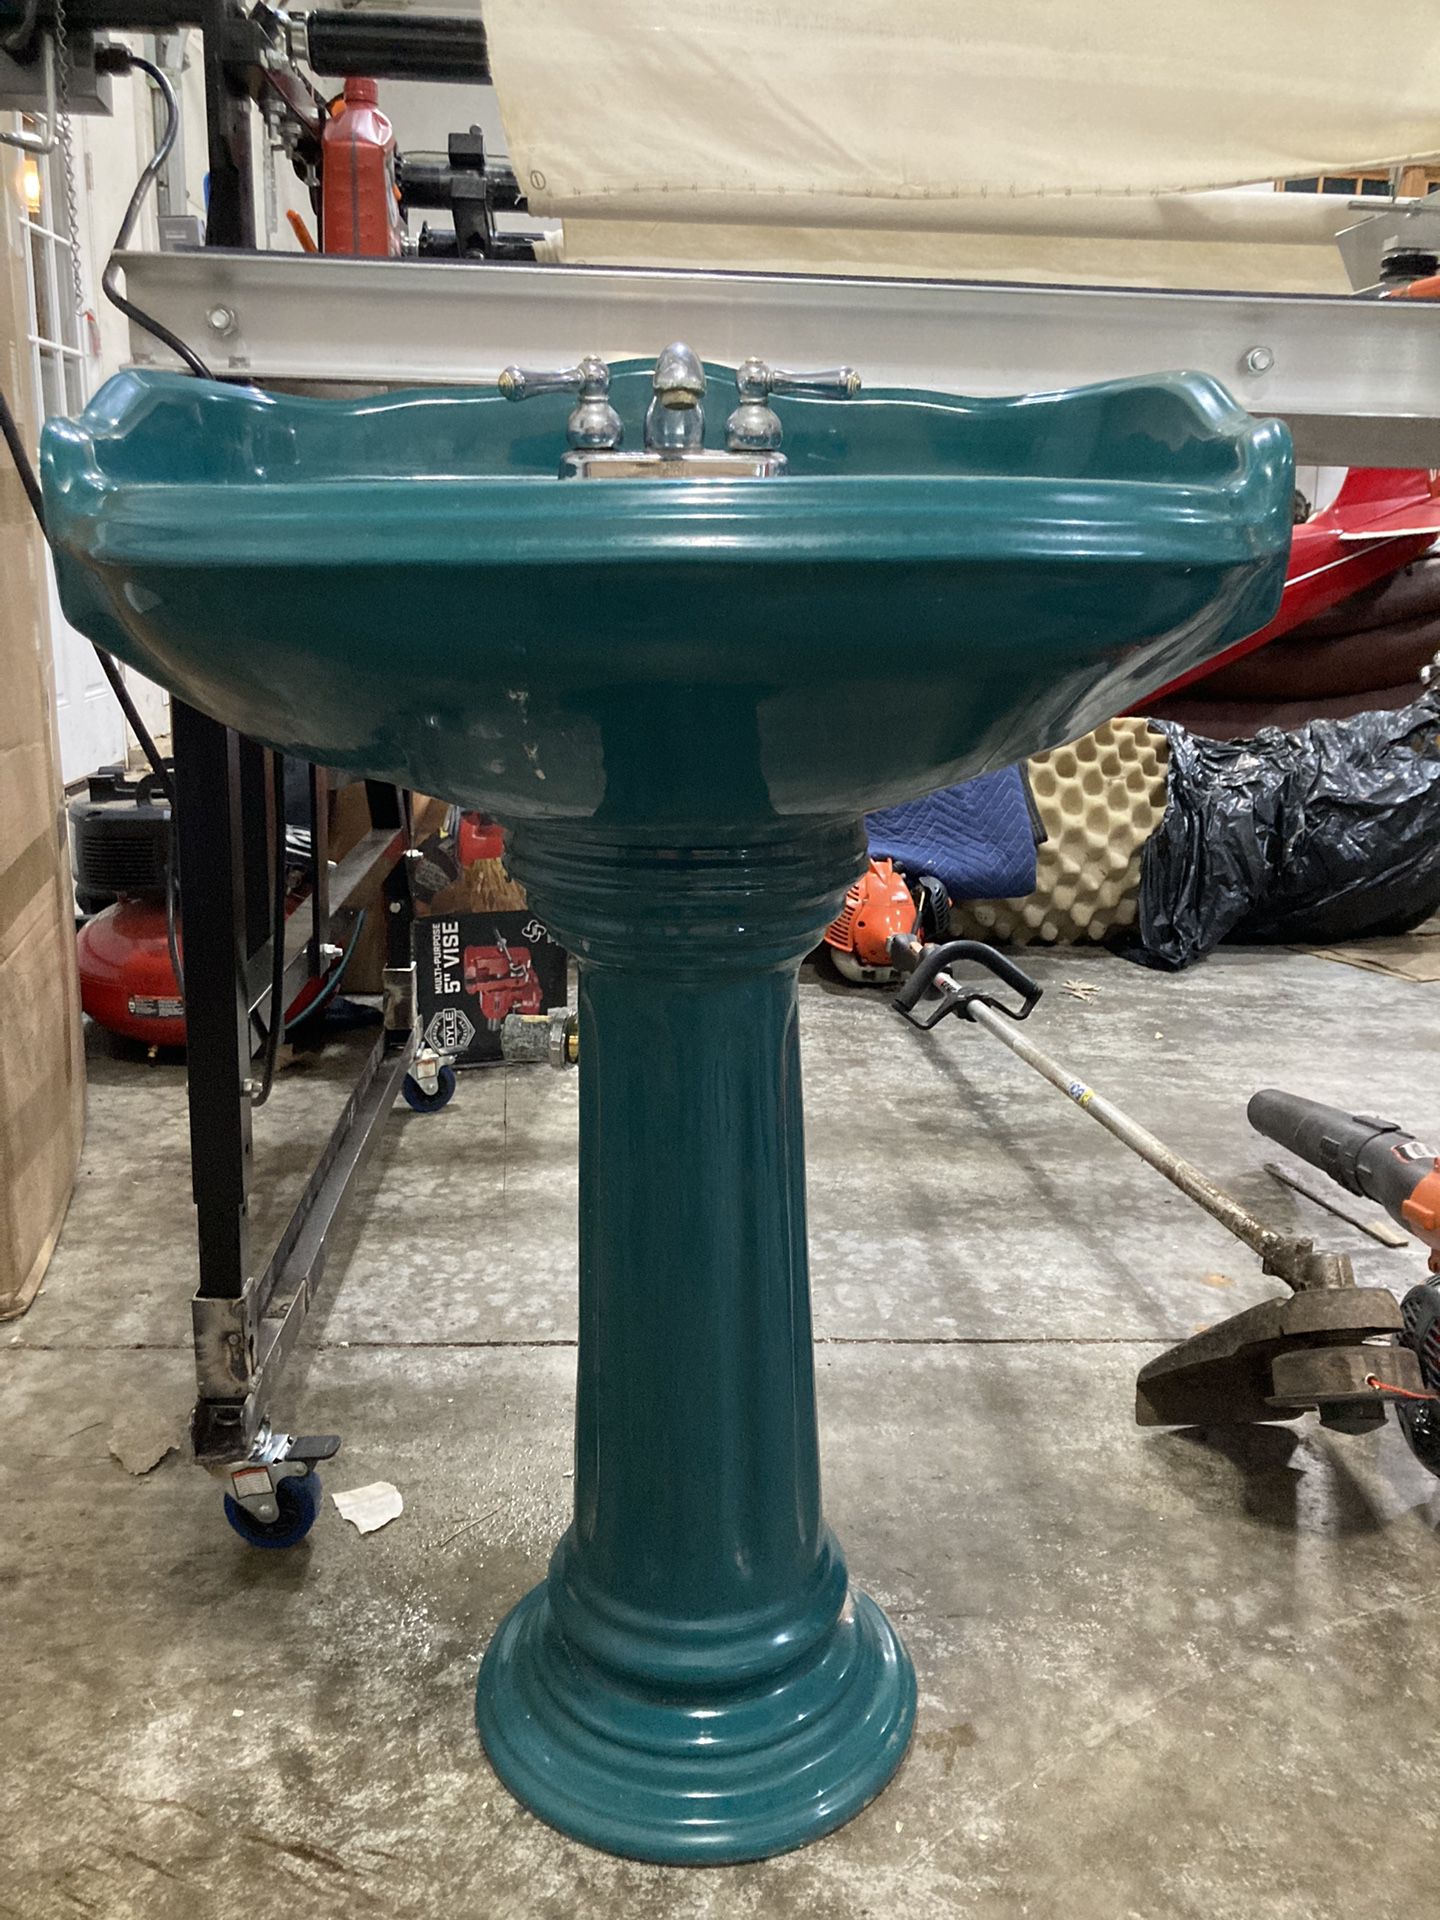 Two Pedestal Sinks And Hot Tub